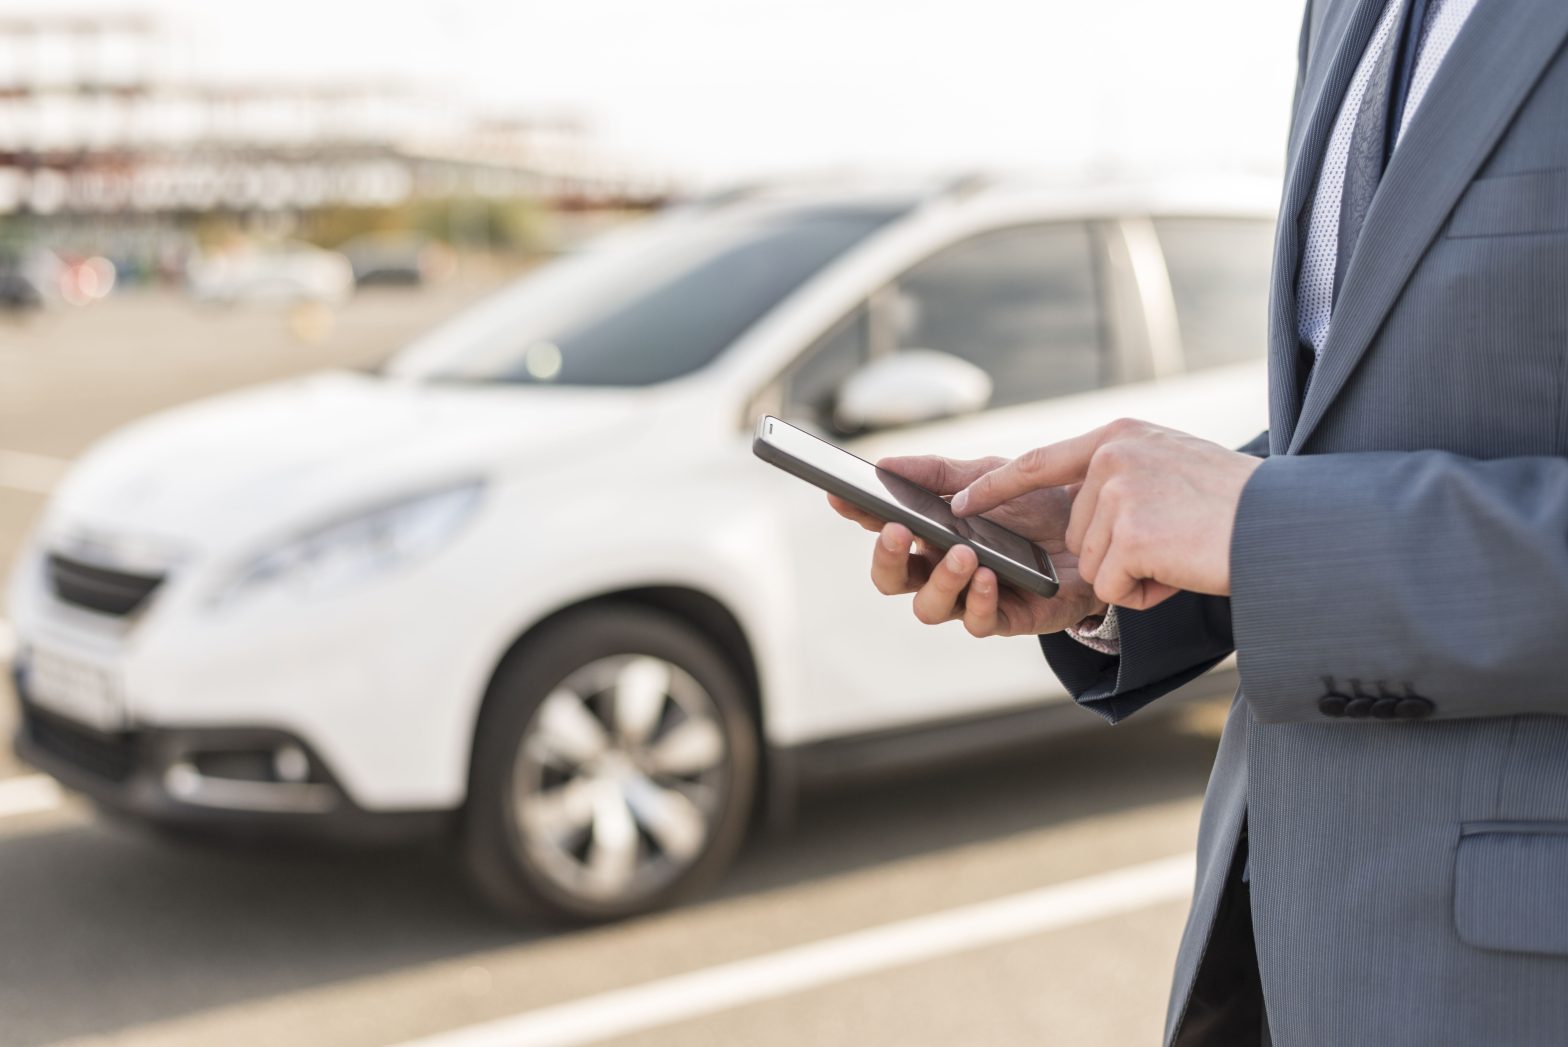 car parking booking using a mobile phone